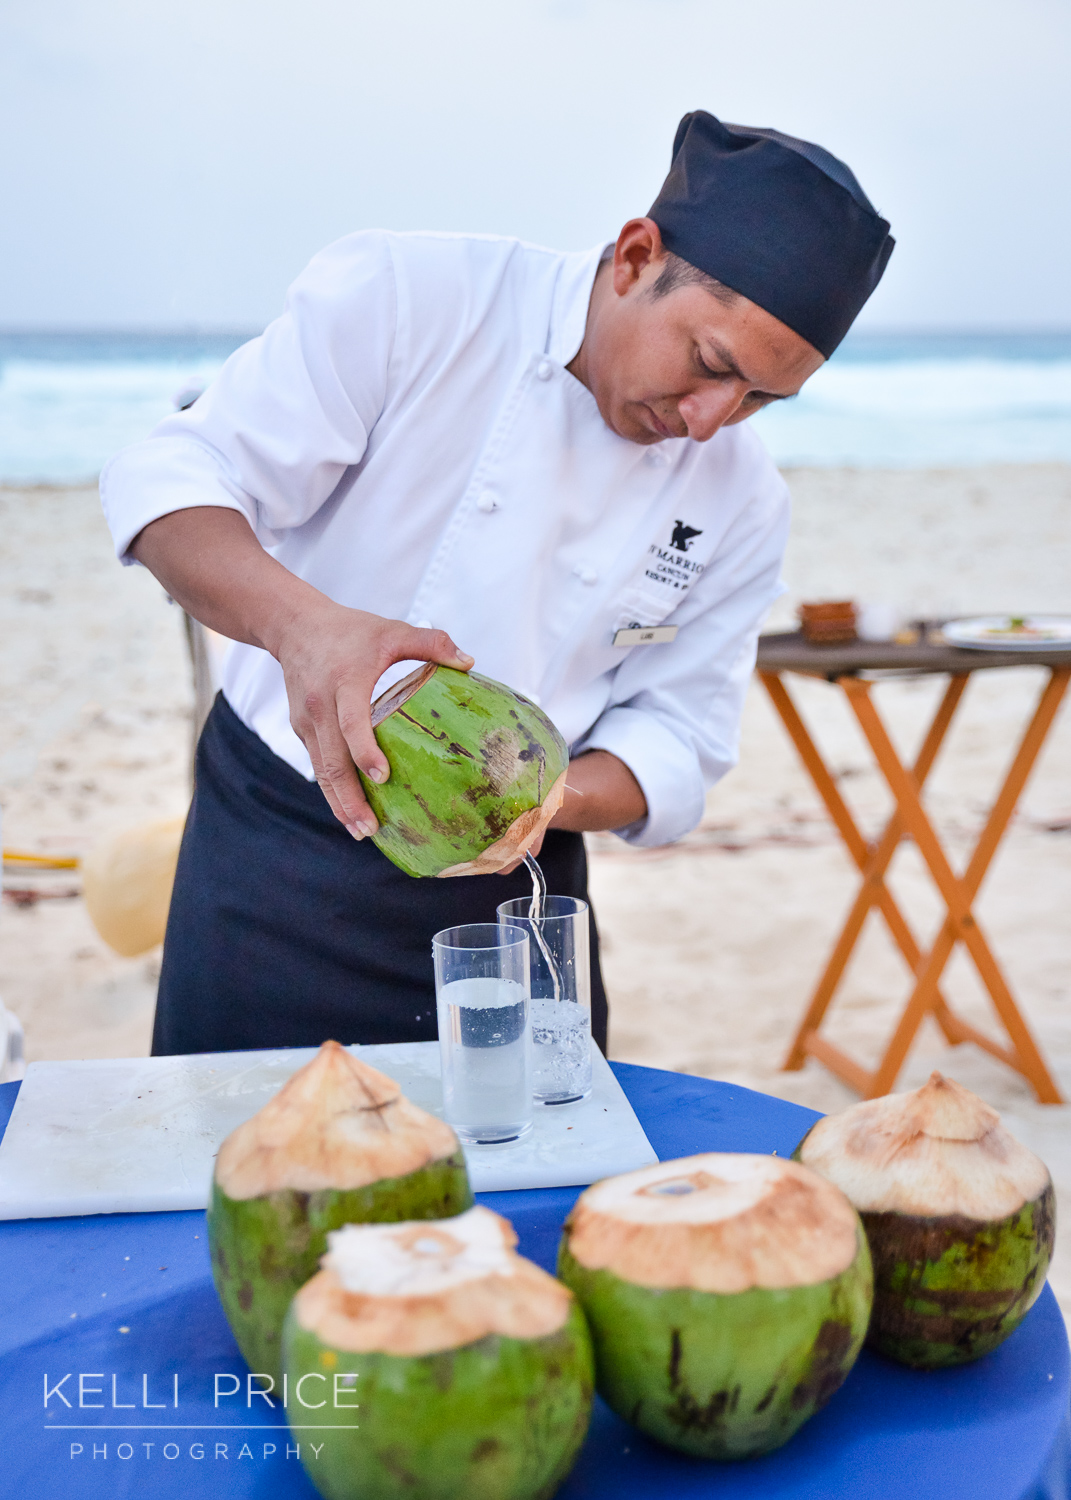 Welcome Reception Drink Service at JW Marriott - Cancun, Mexico